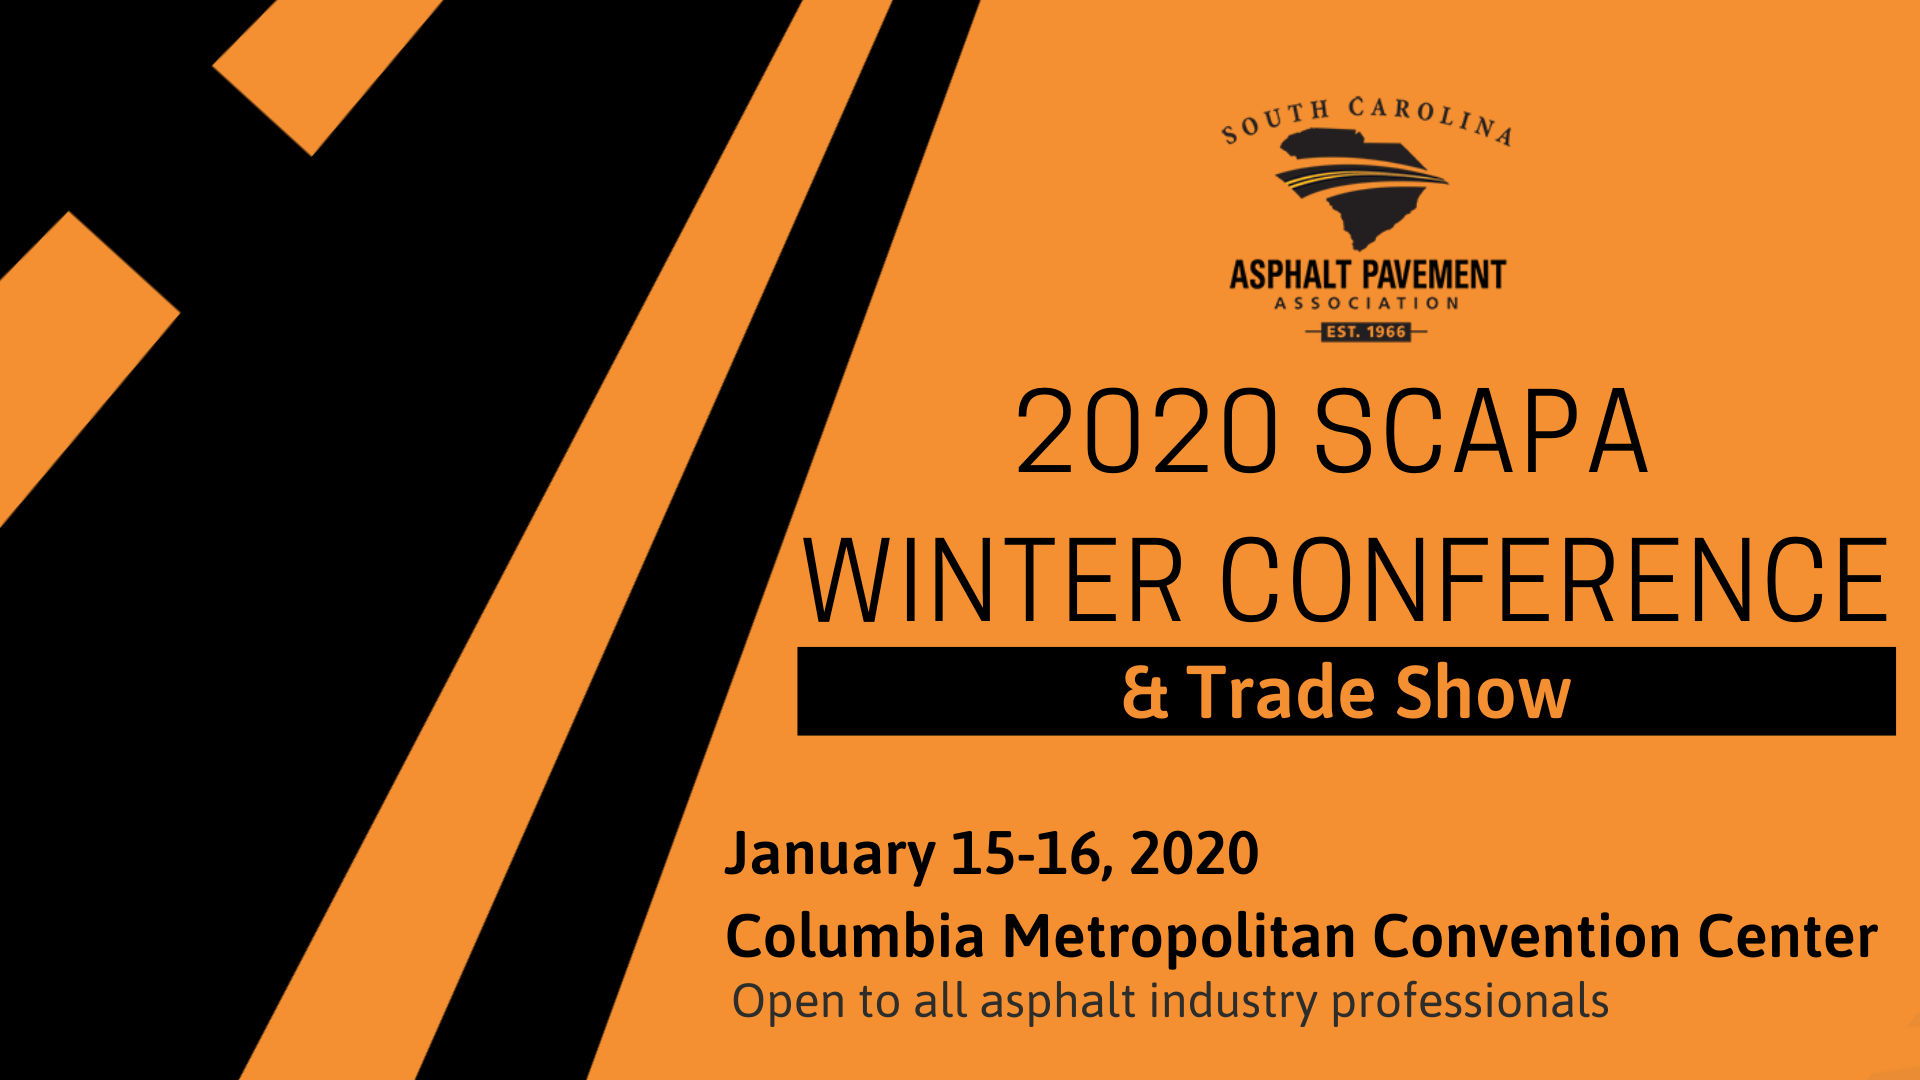 2020 SCAPA Winter Conference & Trade Show